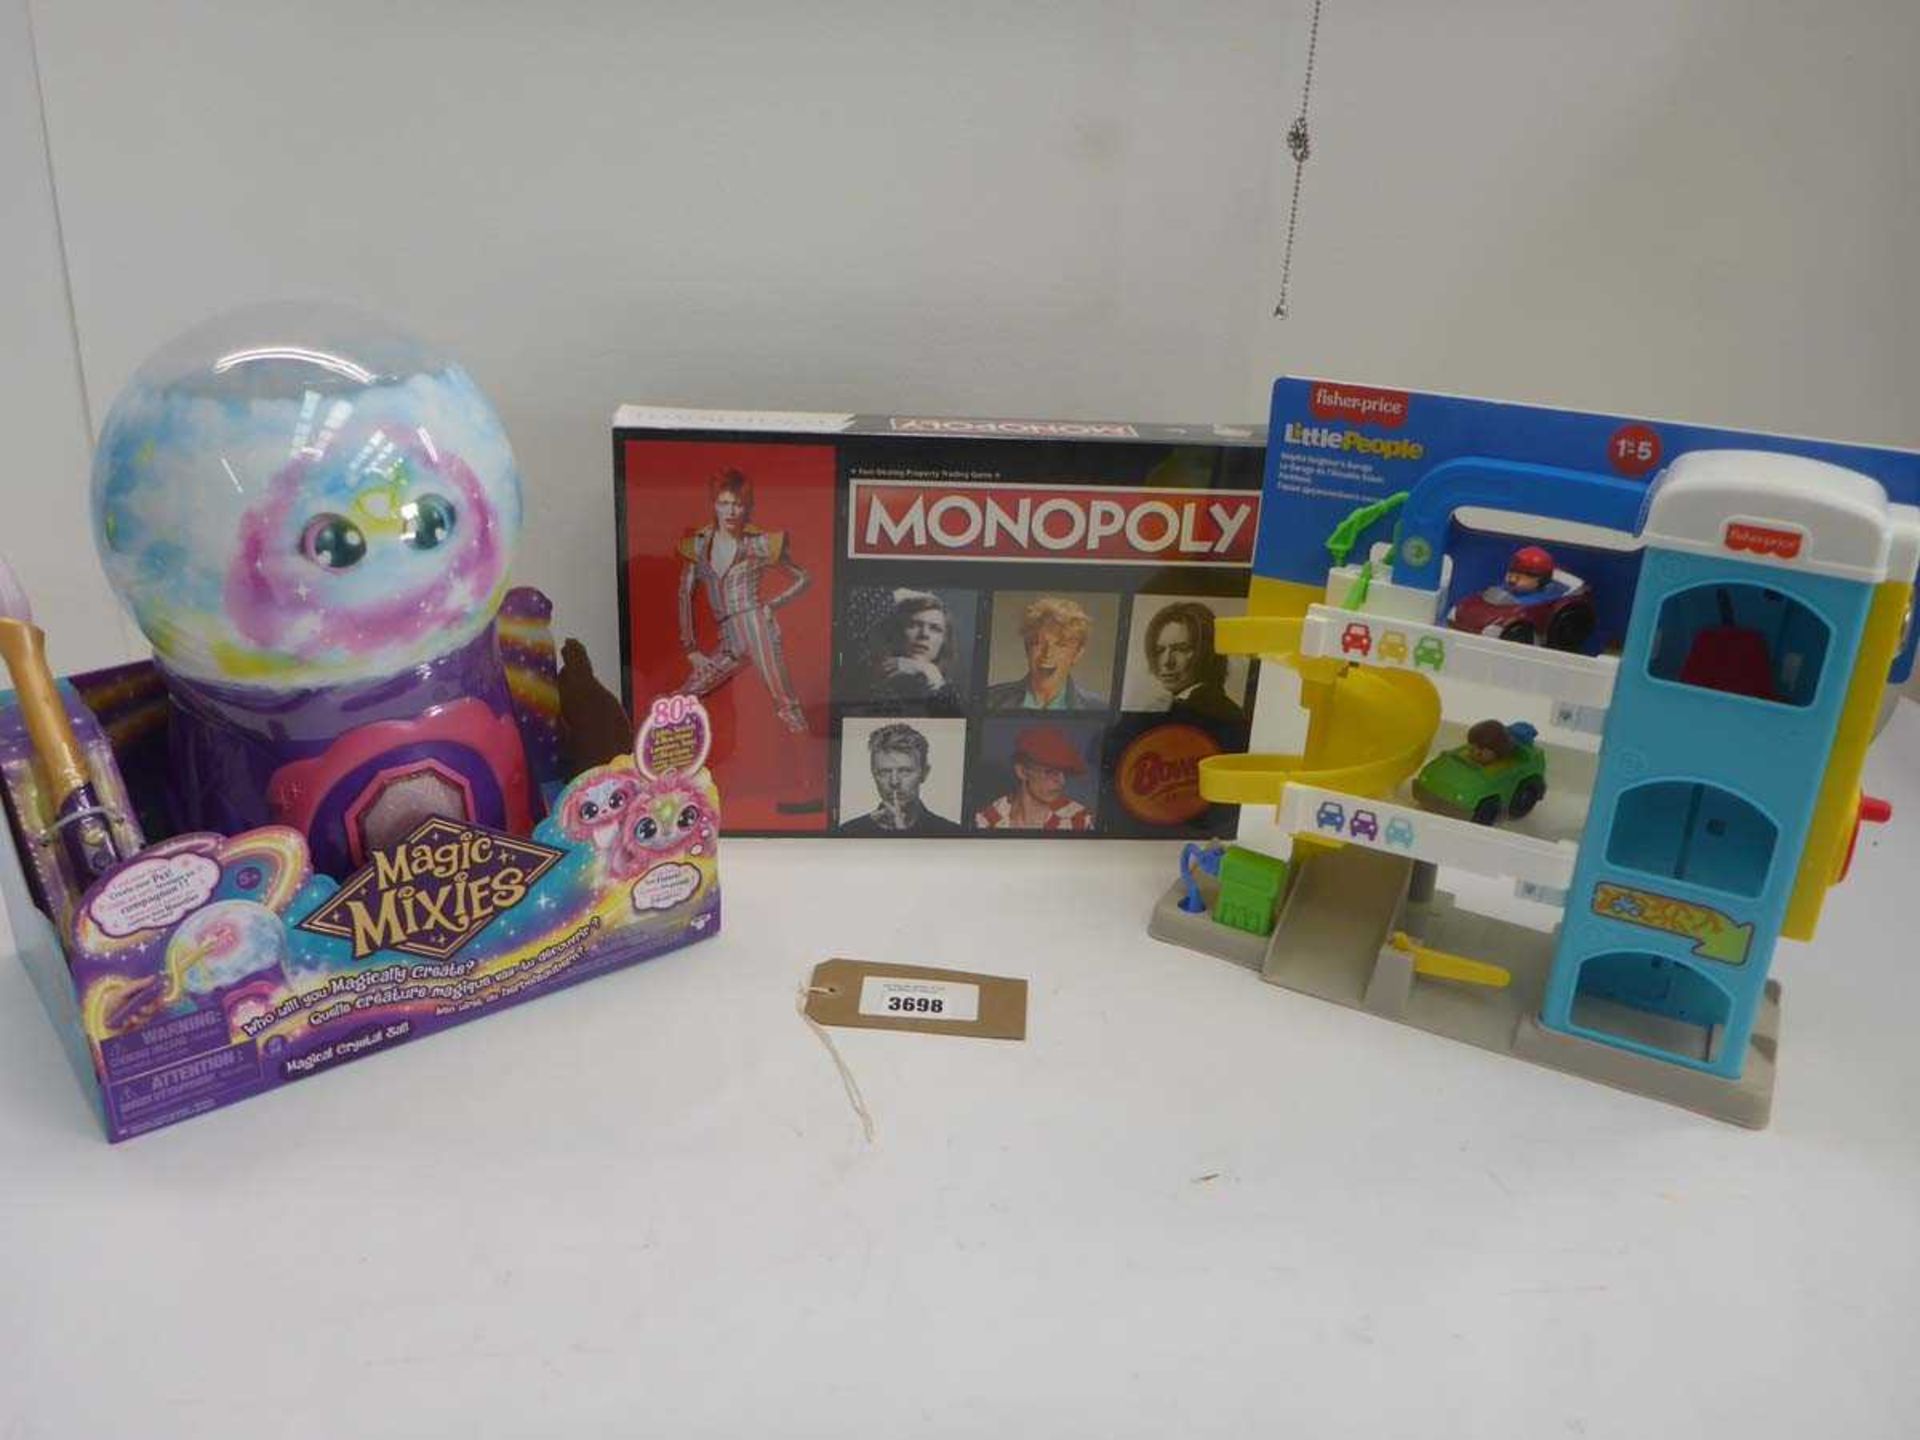 +VAT Monopoly Bowie Edition, Magic Mixies crystal ball and Fisher Price Little People garage set